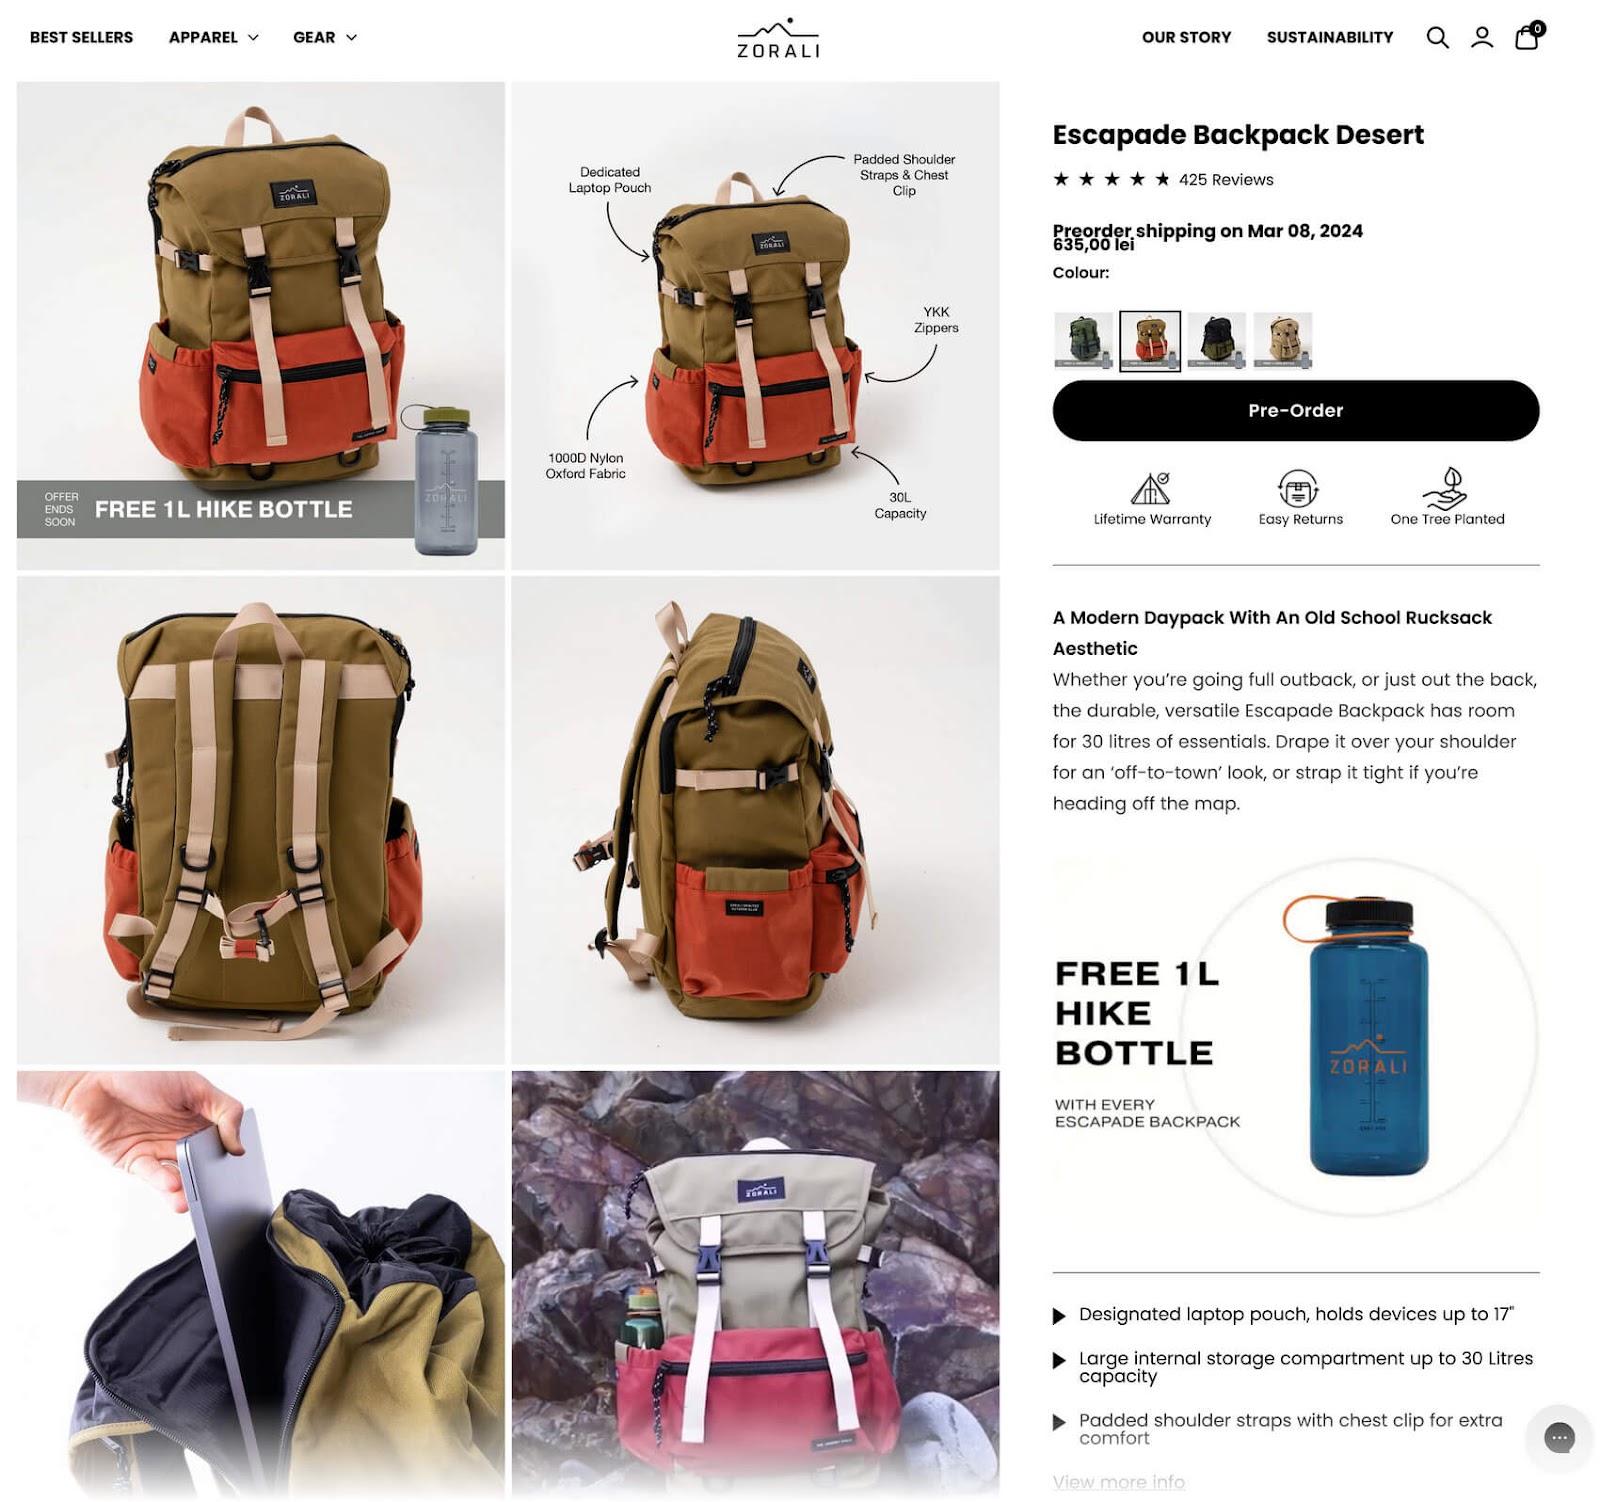 Zorali's product page for best-selling backpack